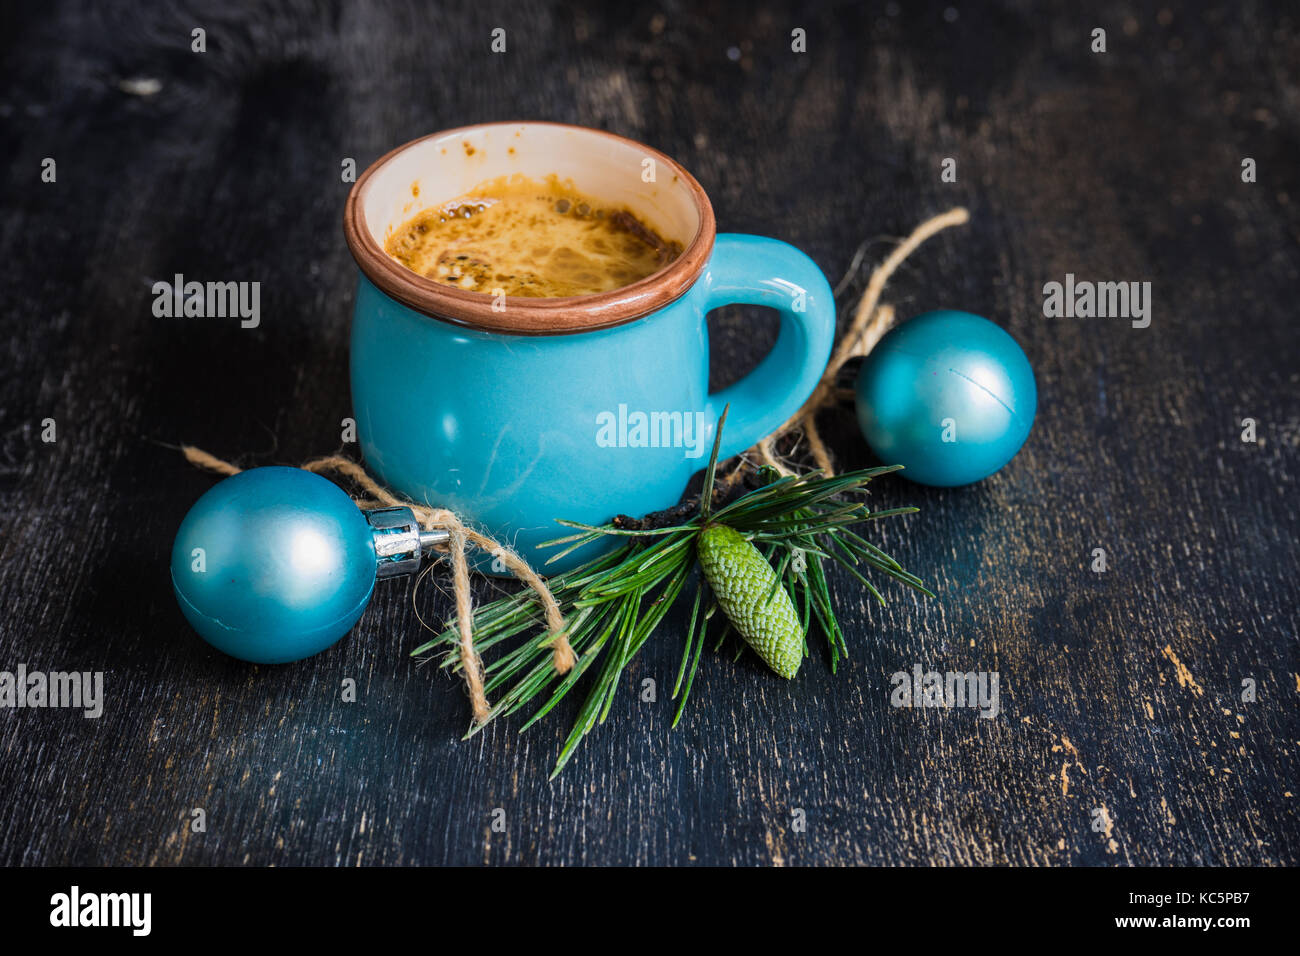 Mug of coffee with spices - cinnamon sticks and anise star with Christmas decor on dark wooden table with copyspace Stock Photo